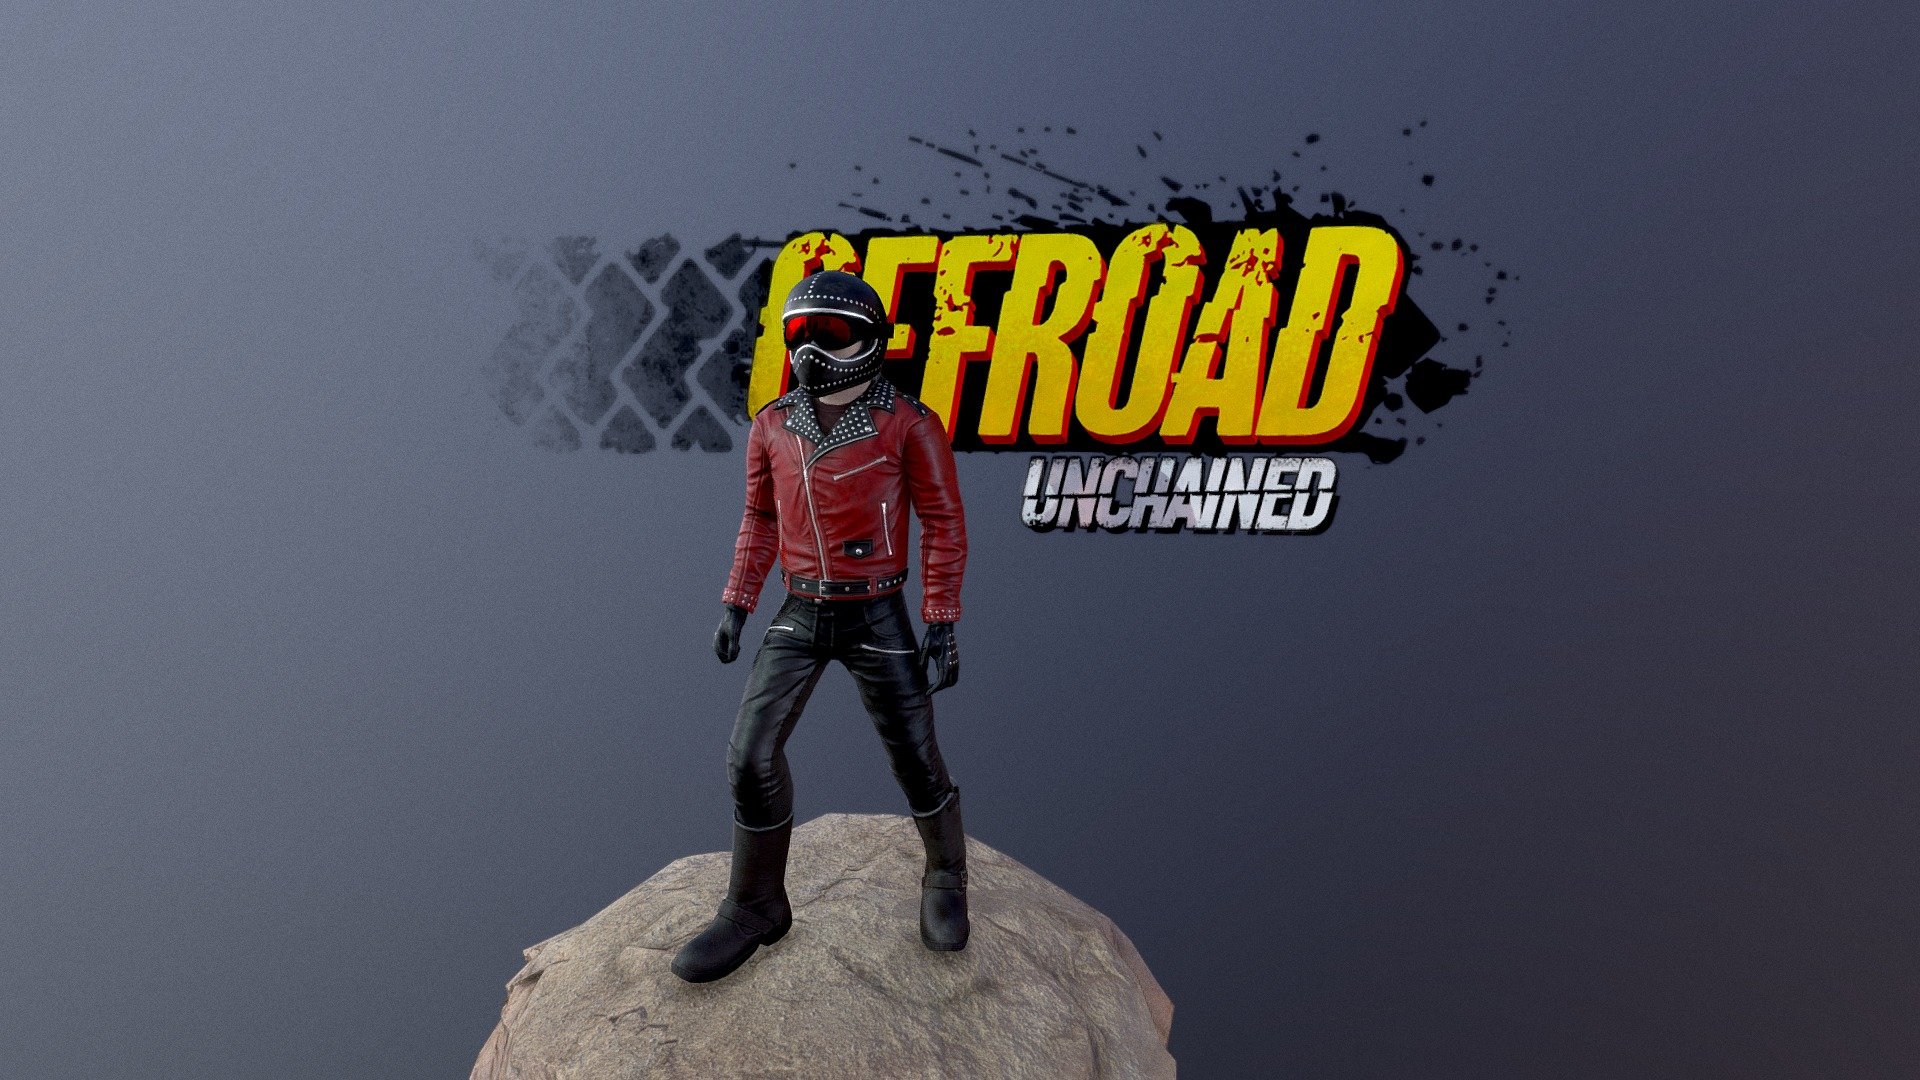 This costume was done for a mobile game Offroad Unchained.

https://play.google.com/store/apps/details?id=com.redbull.offroad&amp;gl=US

https://apps.apple.com/ph/app/offroad-unchained/id1575499681 - Studded Leather Jacket - Offroad Unchained - 3D model by Adnman (@adn) 3d model